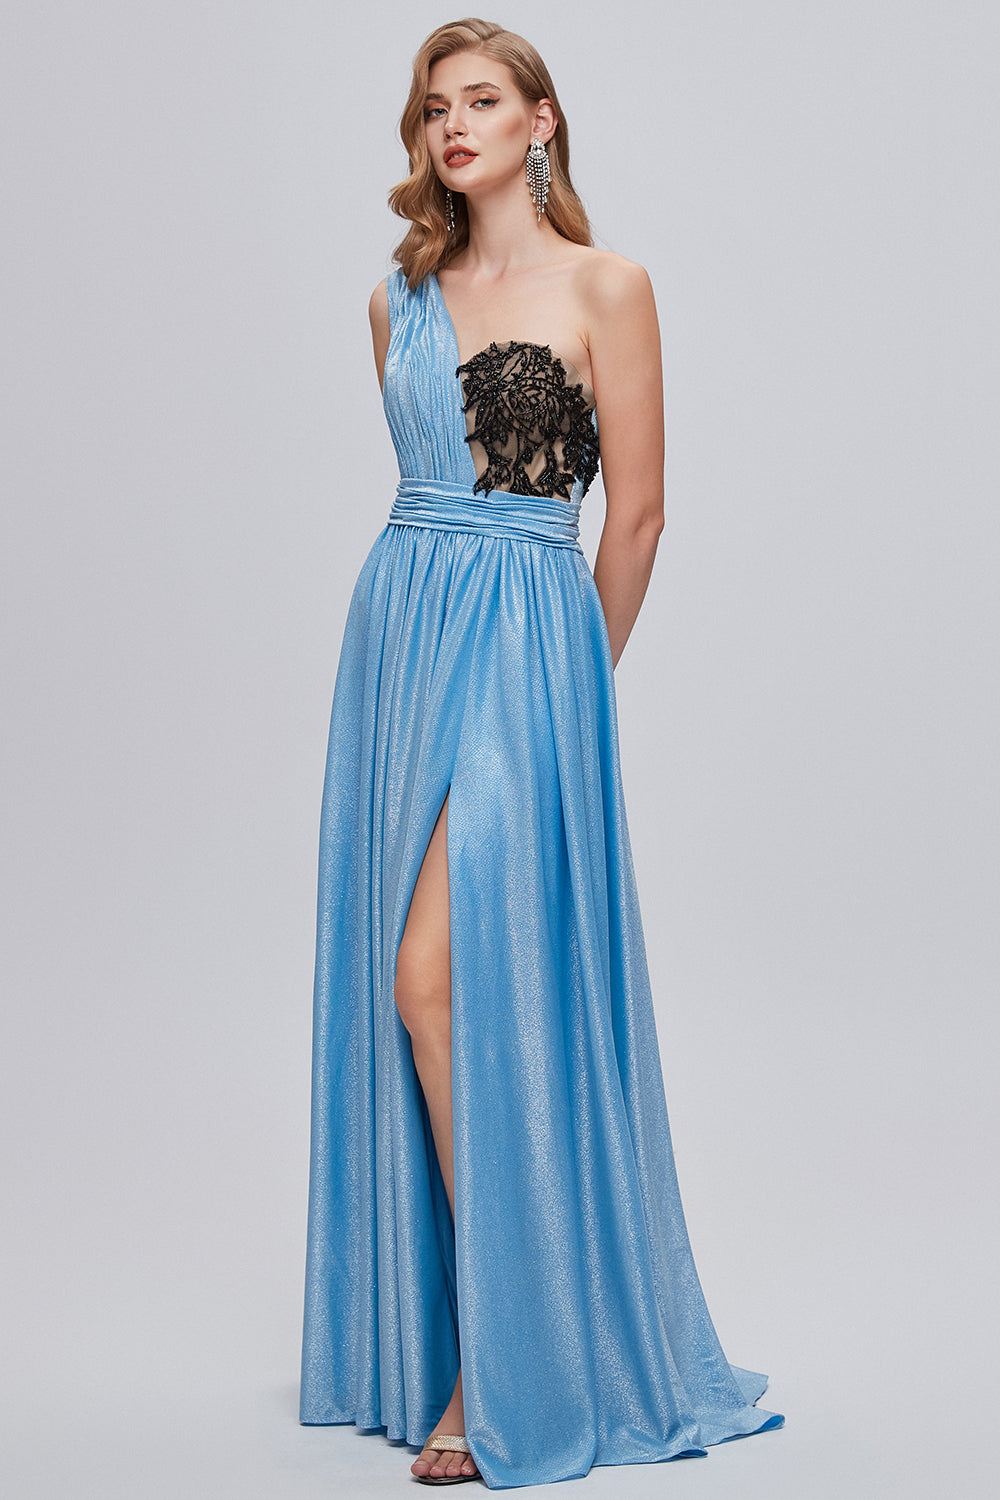 Blue One Shoulder Ruched Long Prom Dress with Appliques